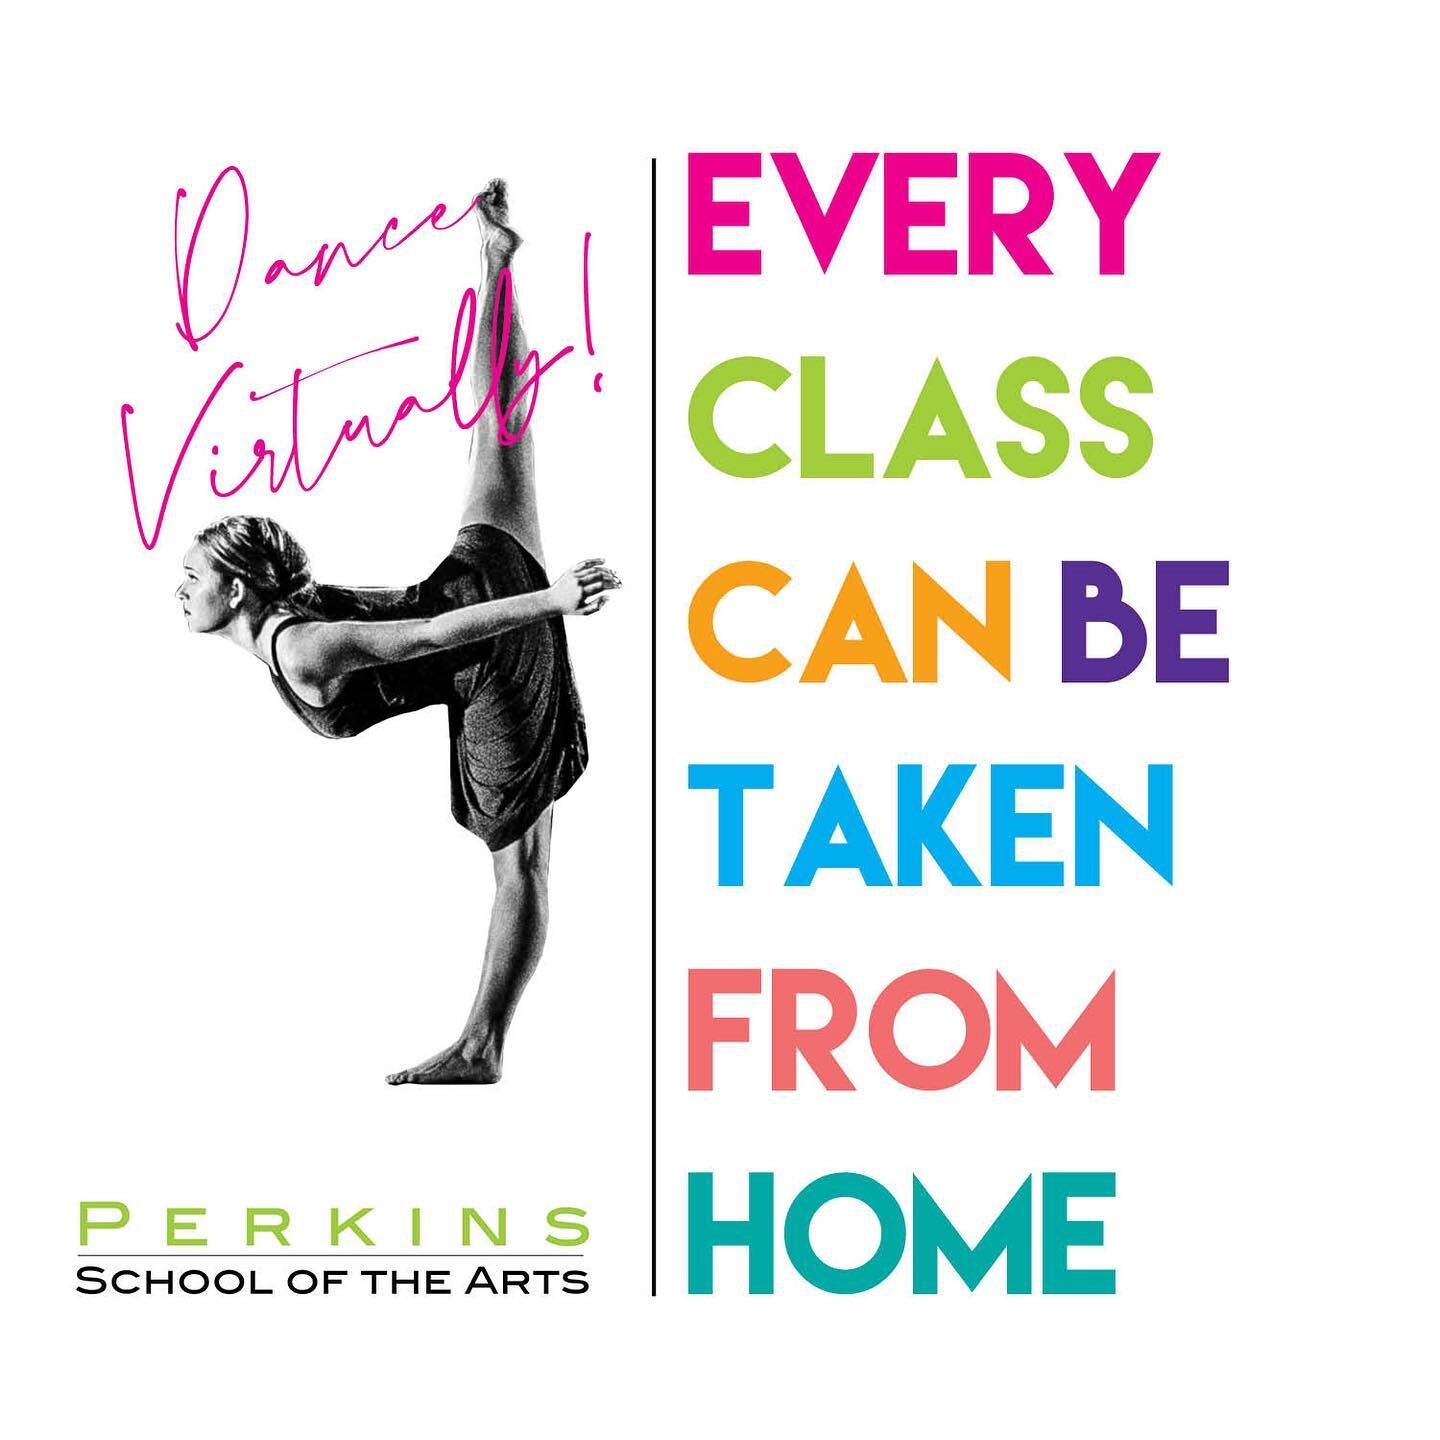 Take class from anywhere! Perkins Live classes can be streamed from anywhere! If you&rsquo;re not comfortable &ldquo;in person&rdquo;classes or don&rsquo;t live in the area, you can still get the full PERKINS experience! Check out our website for our